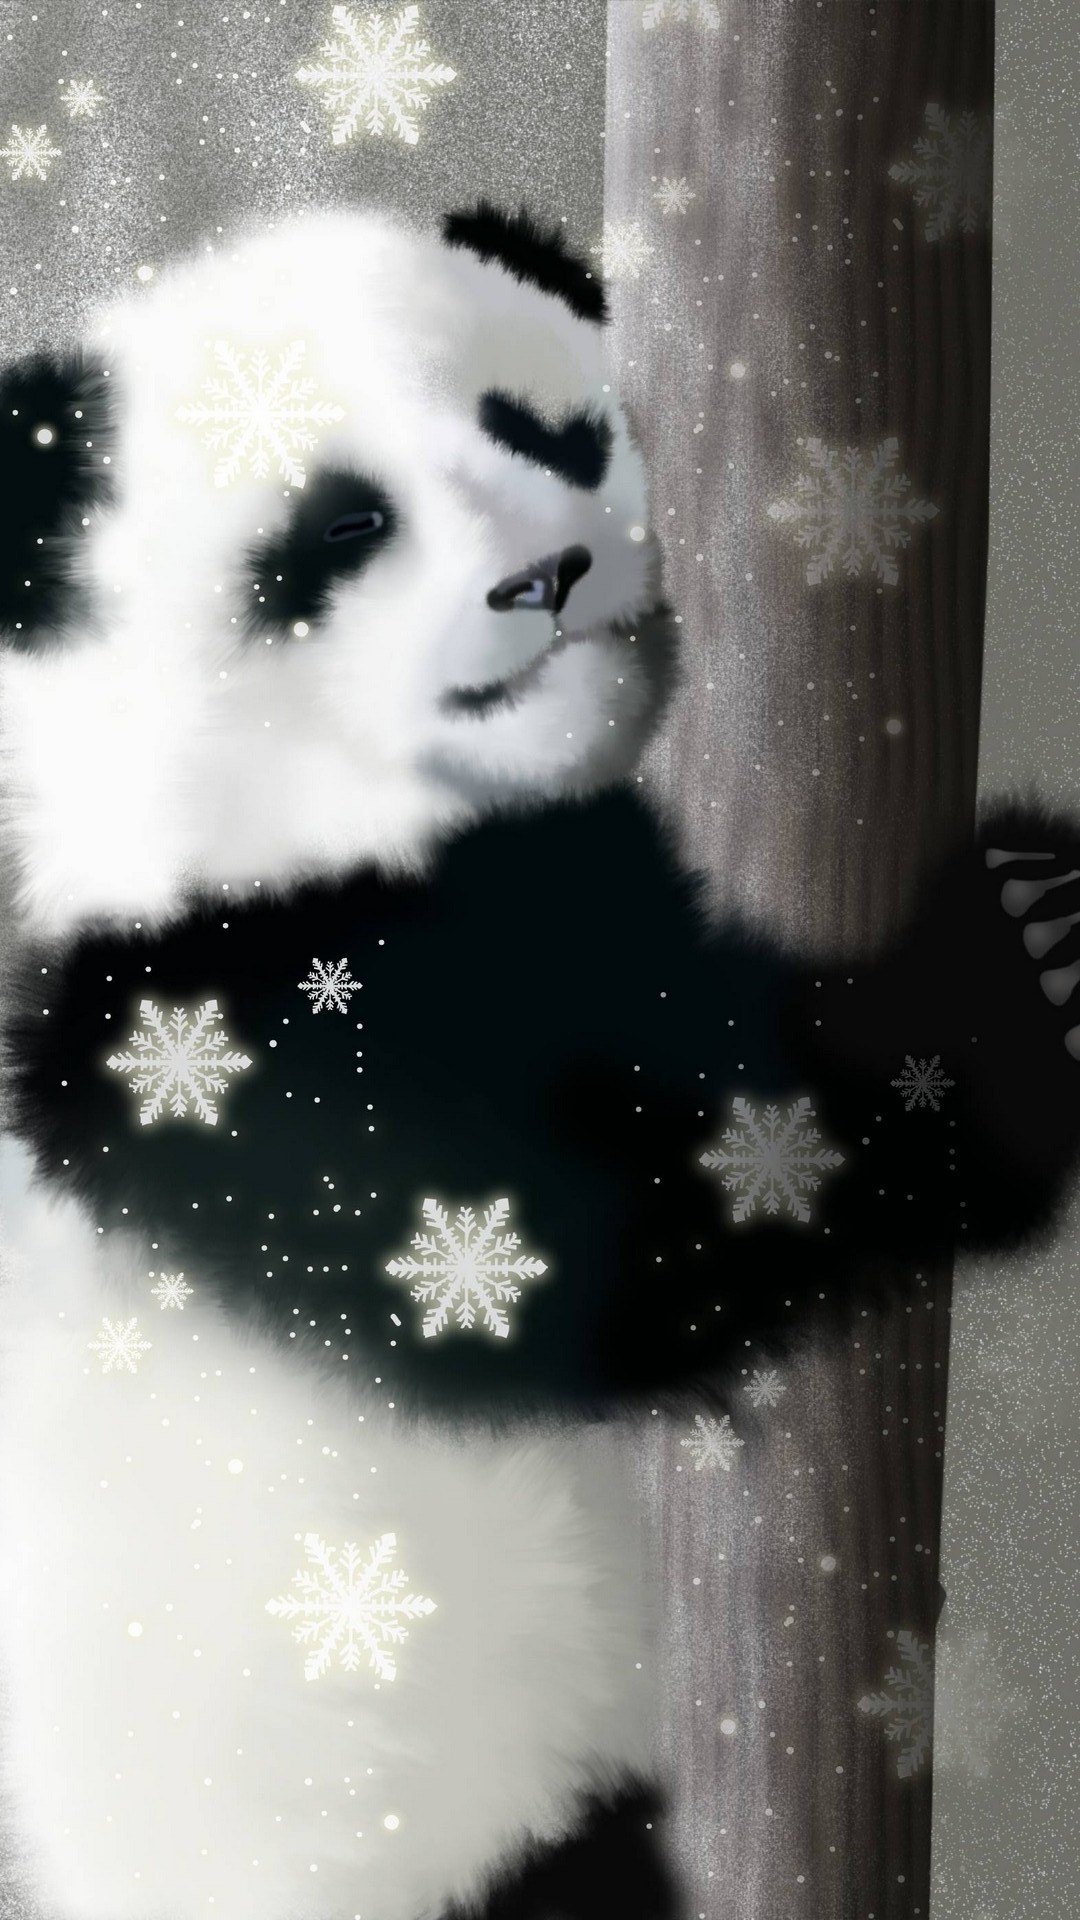 Cute Panda Wallpaper Android with HD resolution 1080x1920